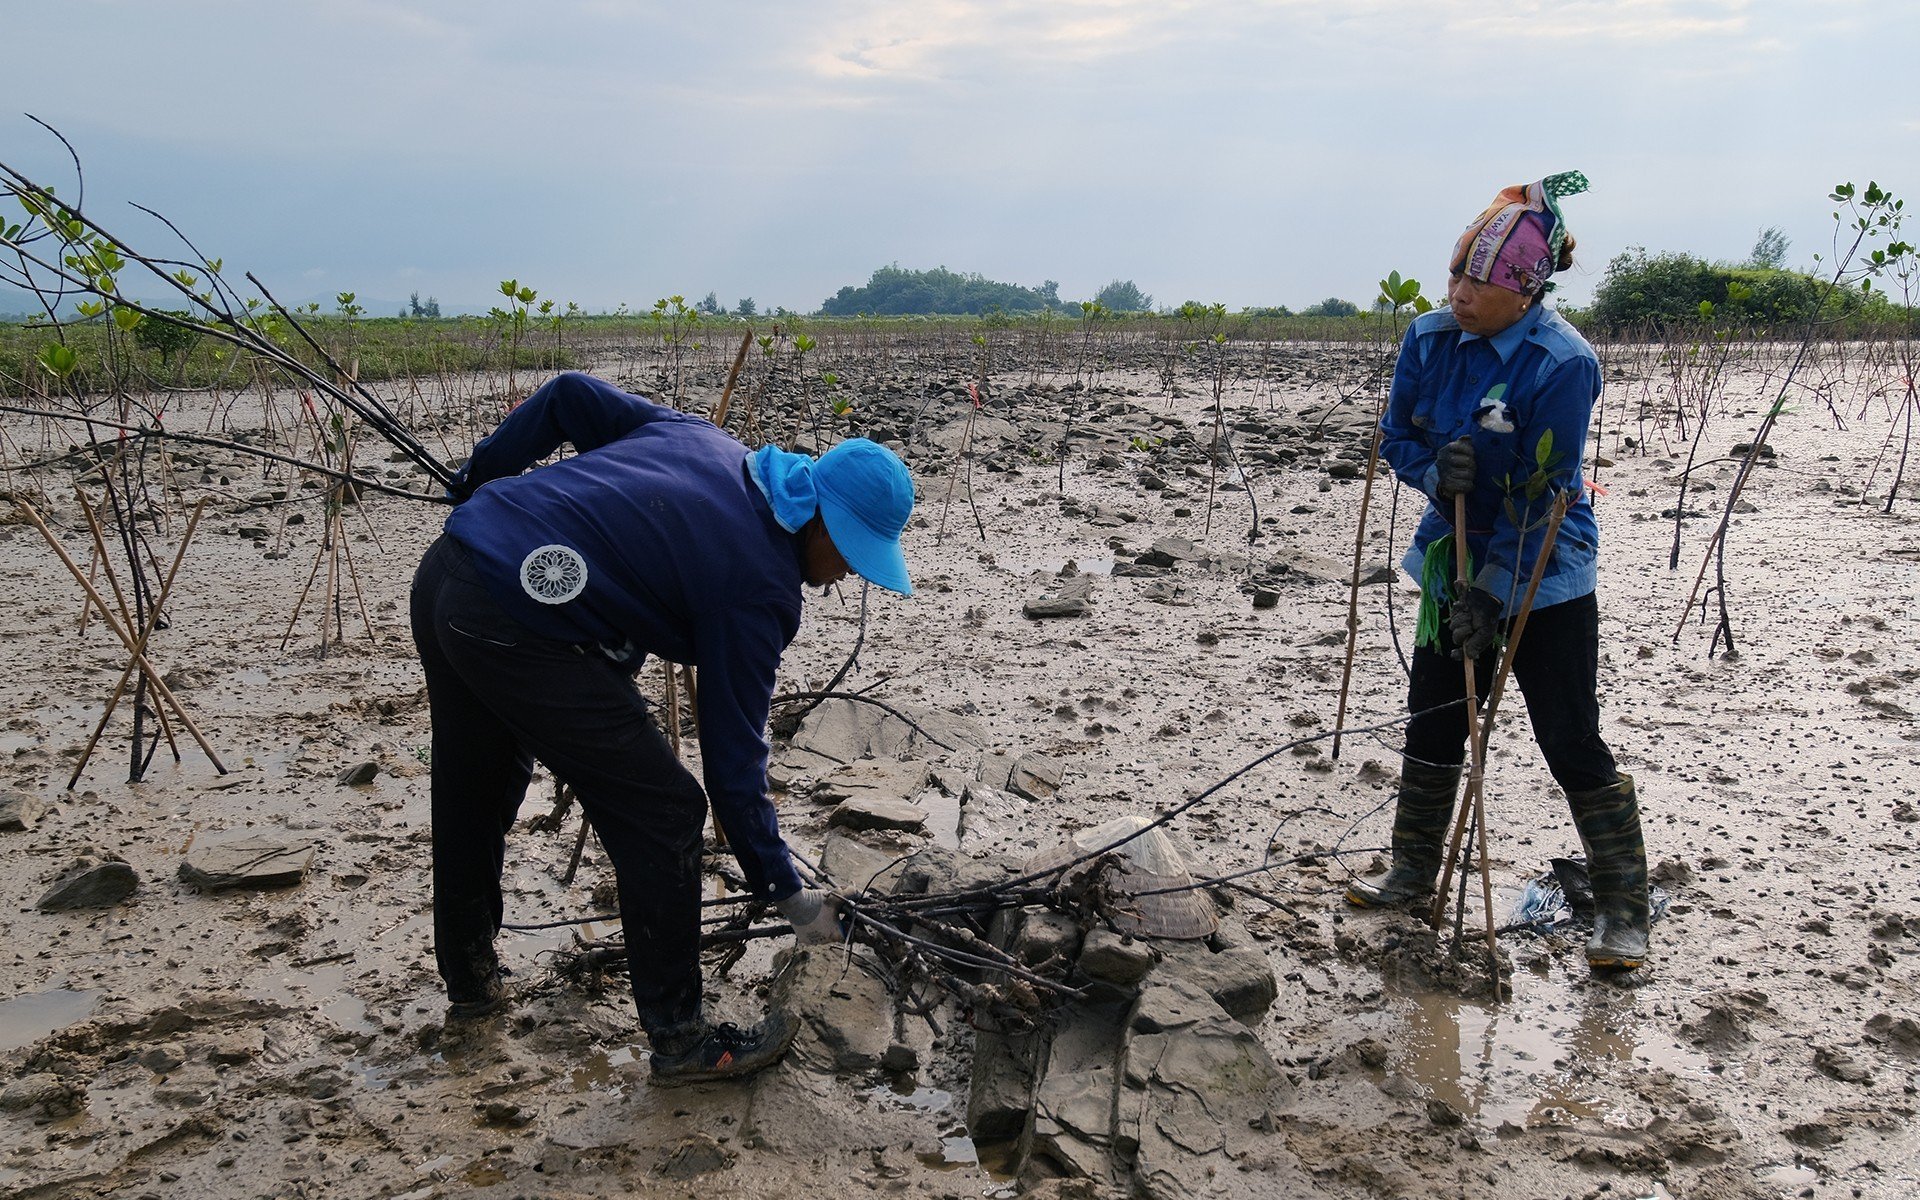 Local residents actively participating in the mangrove reforestation project under the FMCR initiative in Quang Ninh province. Photo: Bao Thang.